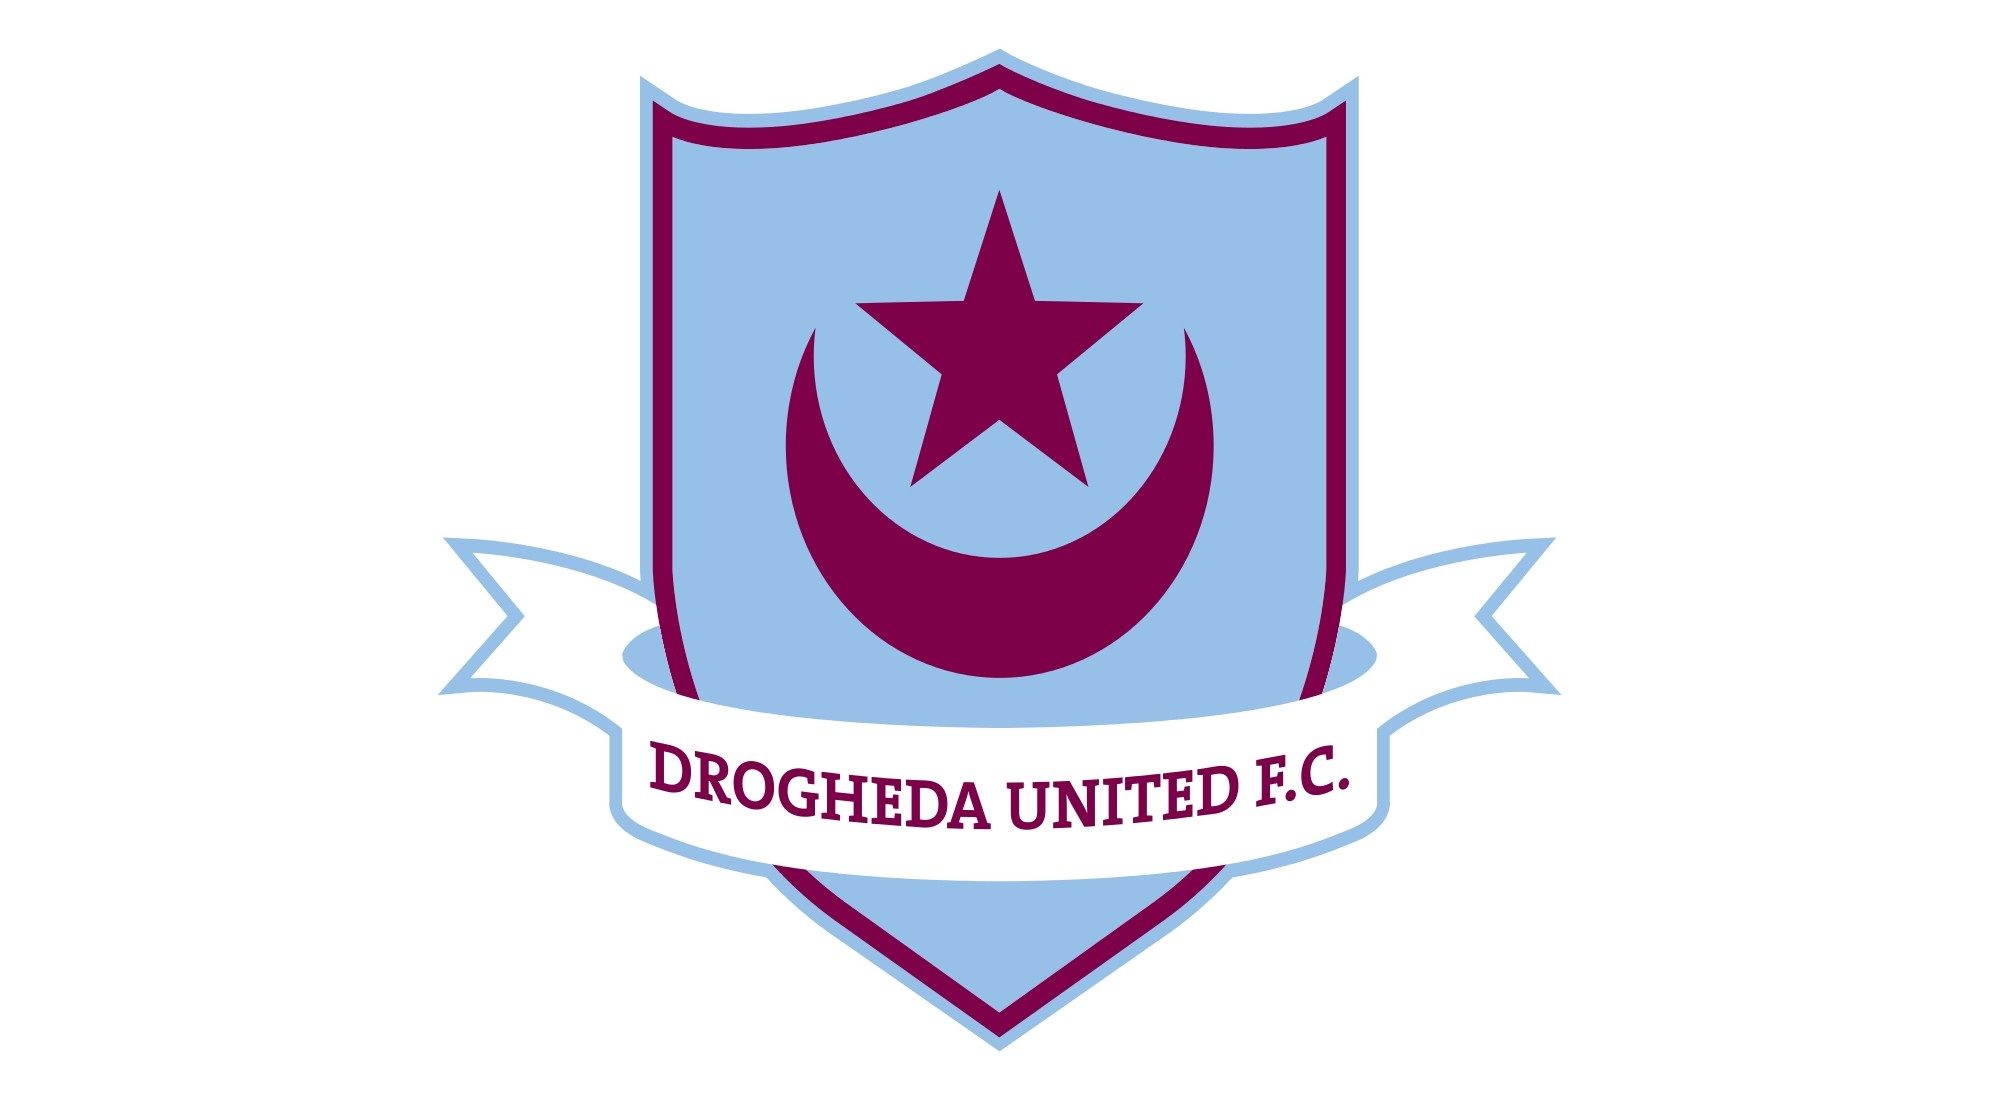 The embem of Drogheda United F.C. featuring a crescent and a star in apparent reference to Ottoman flag